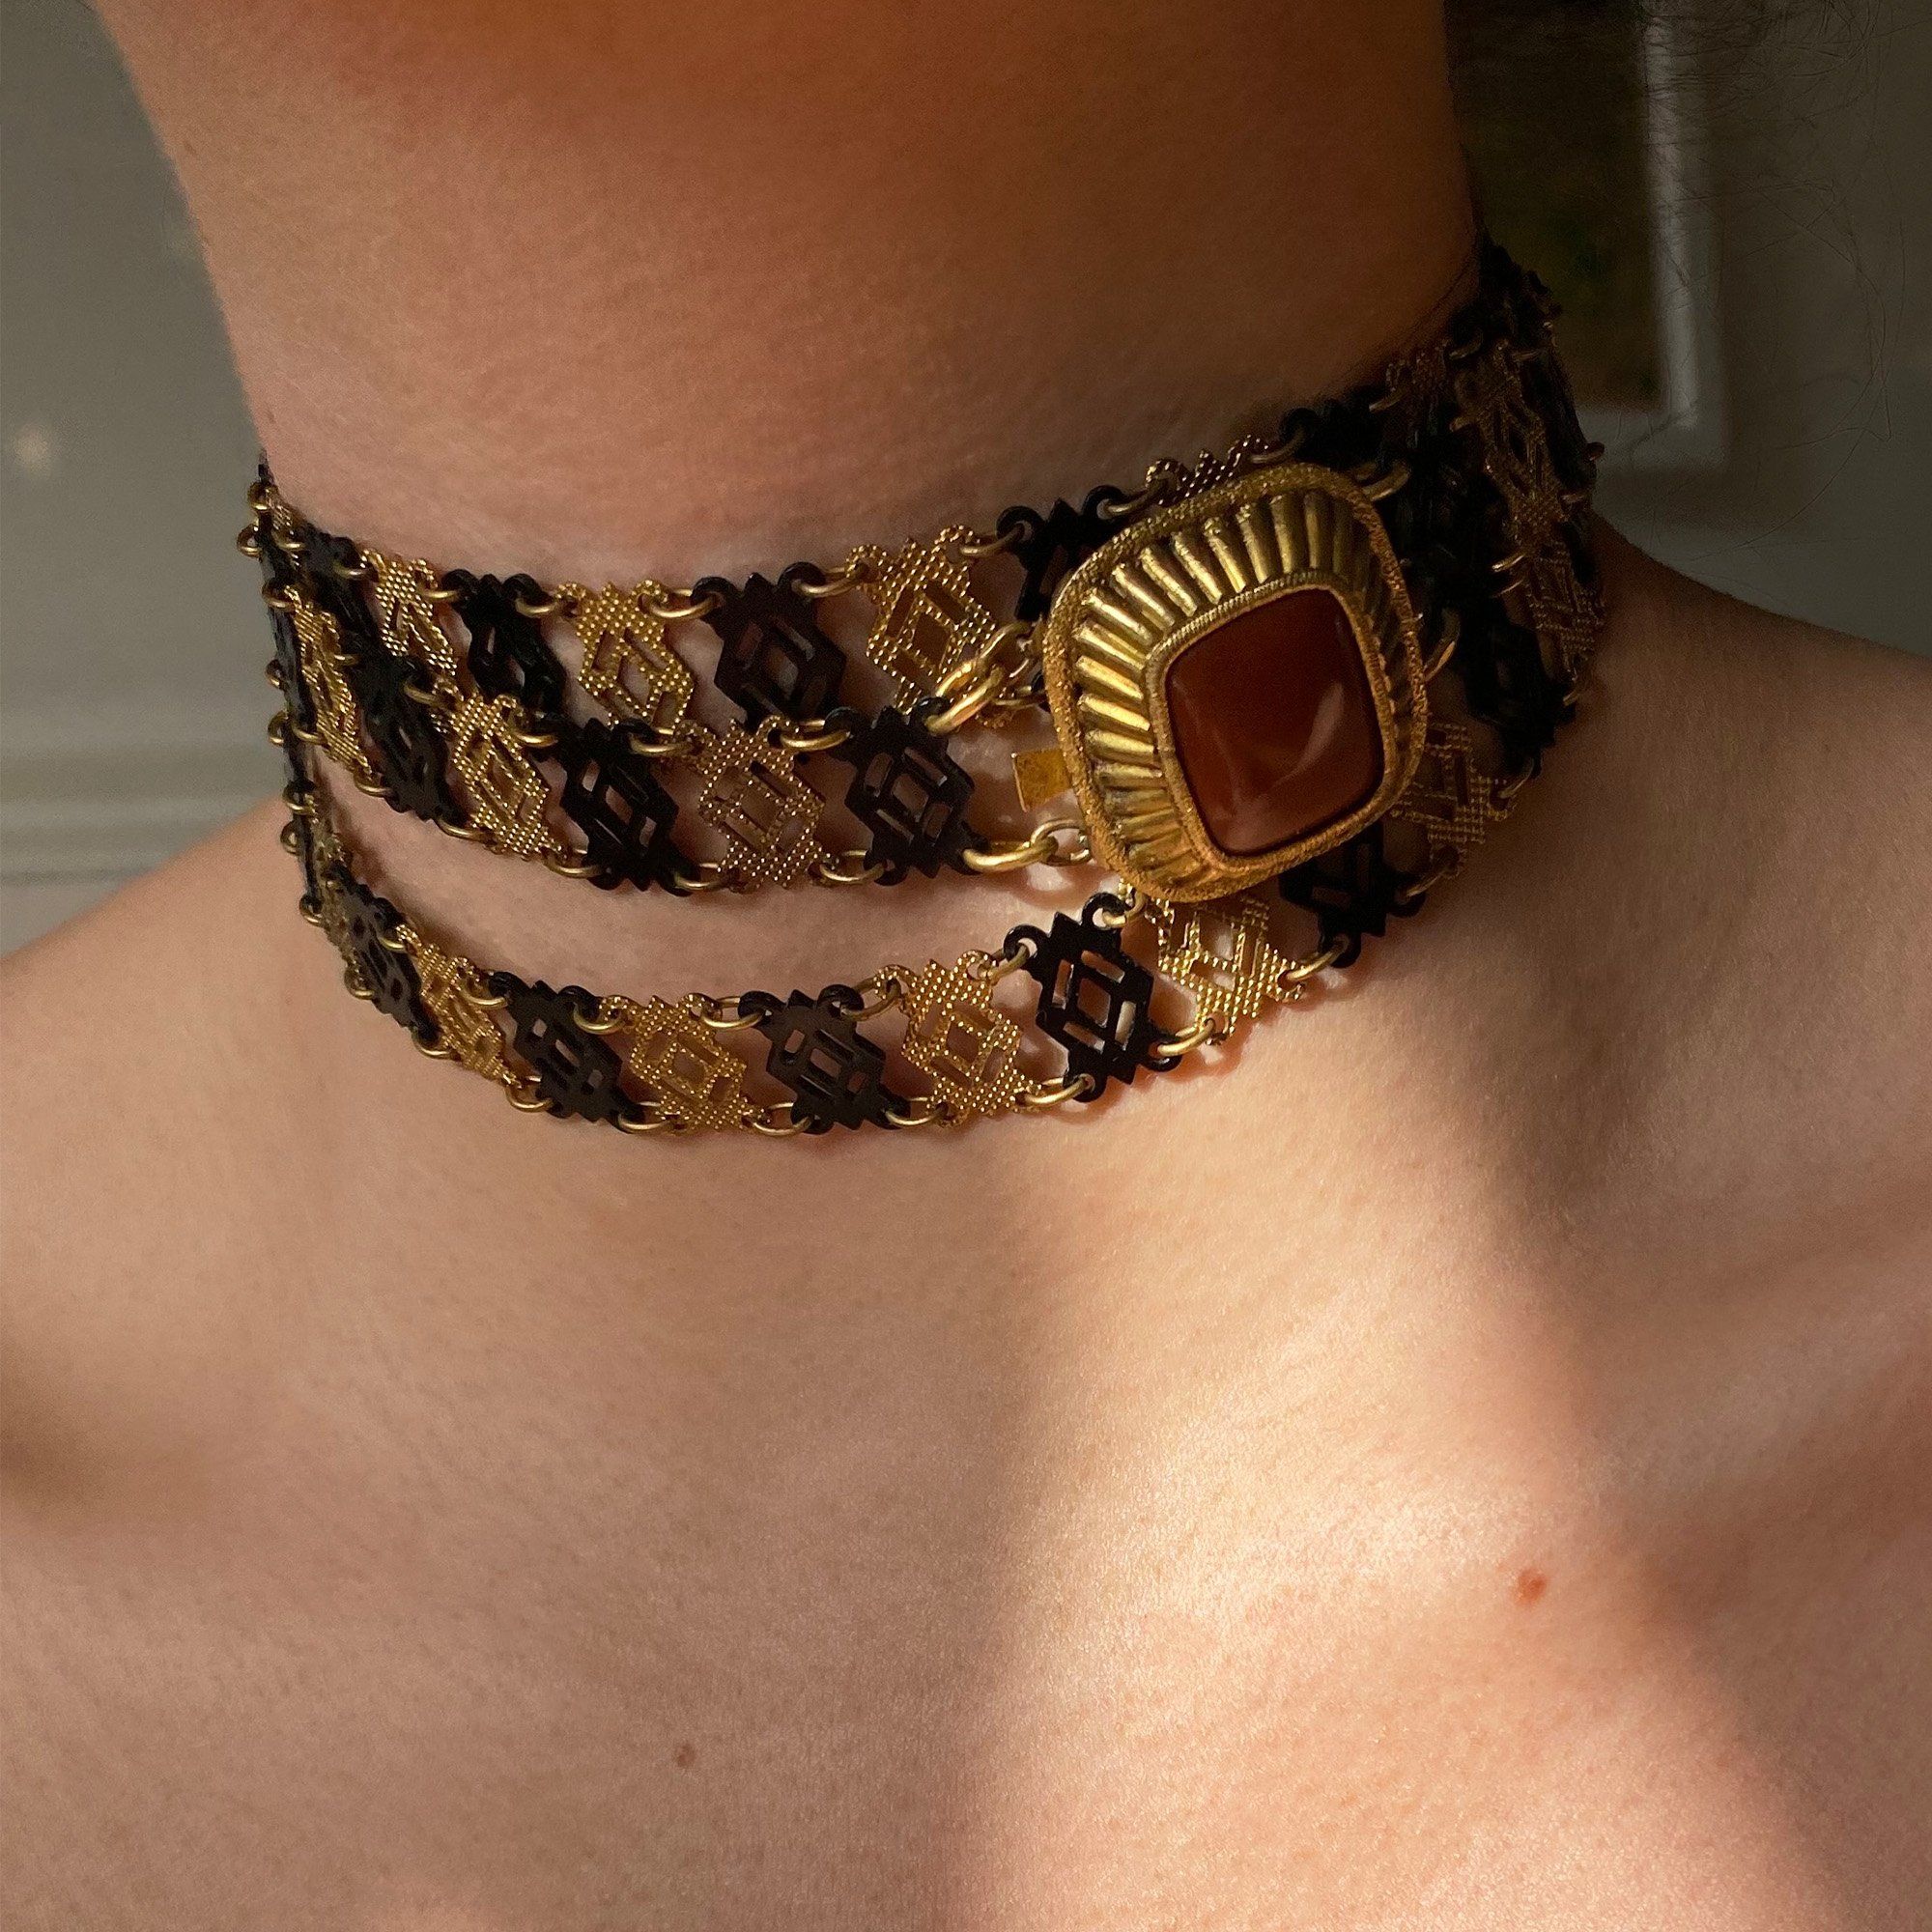 Detail of pinchbeck and black lacquer chain on a neck